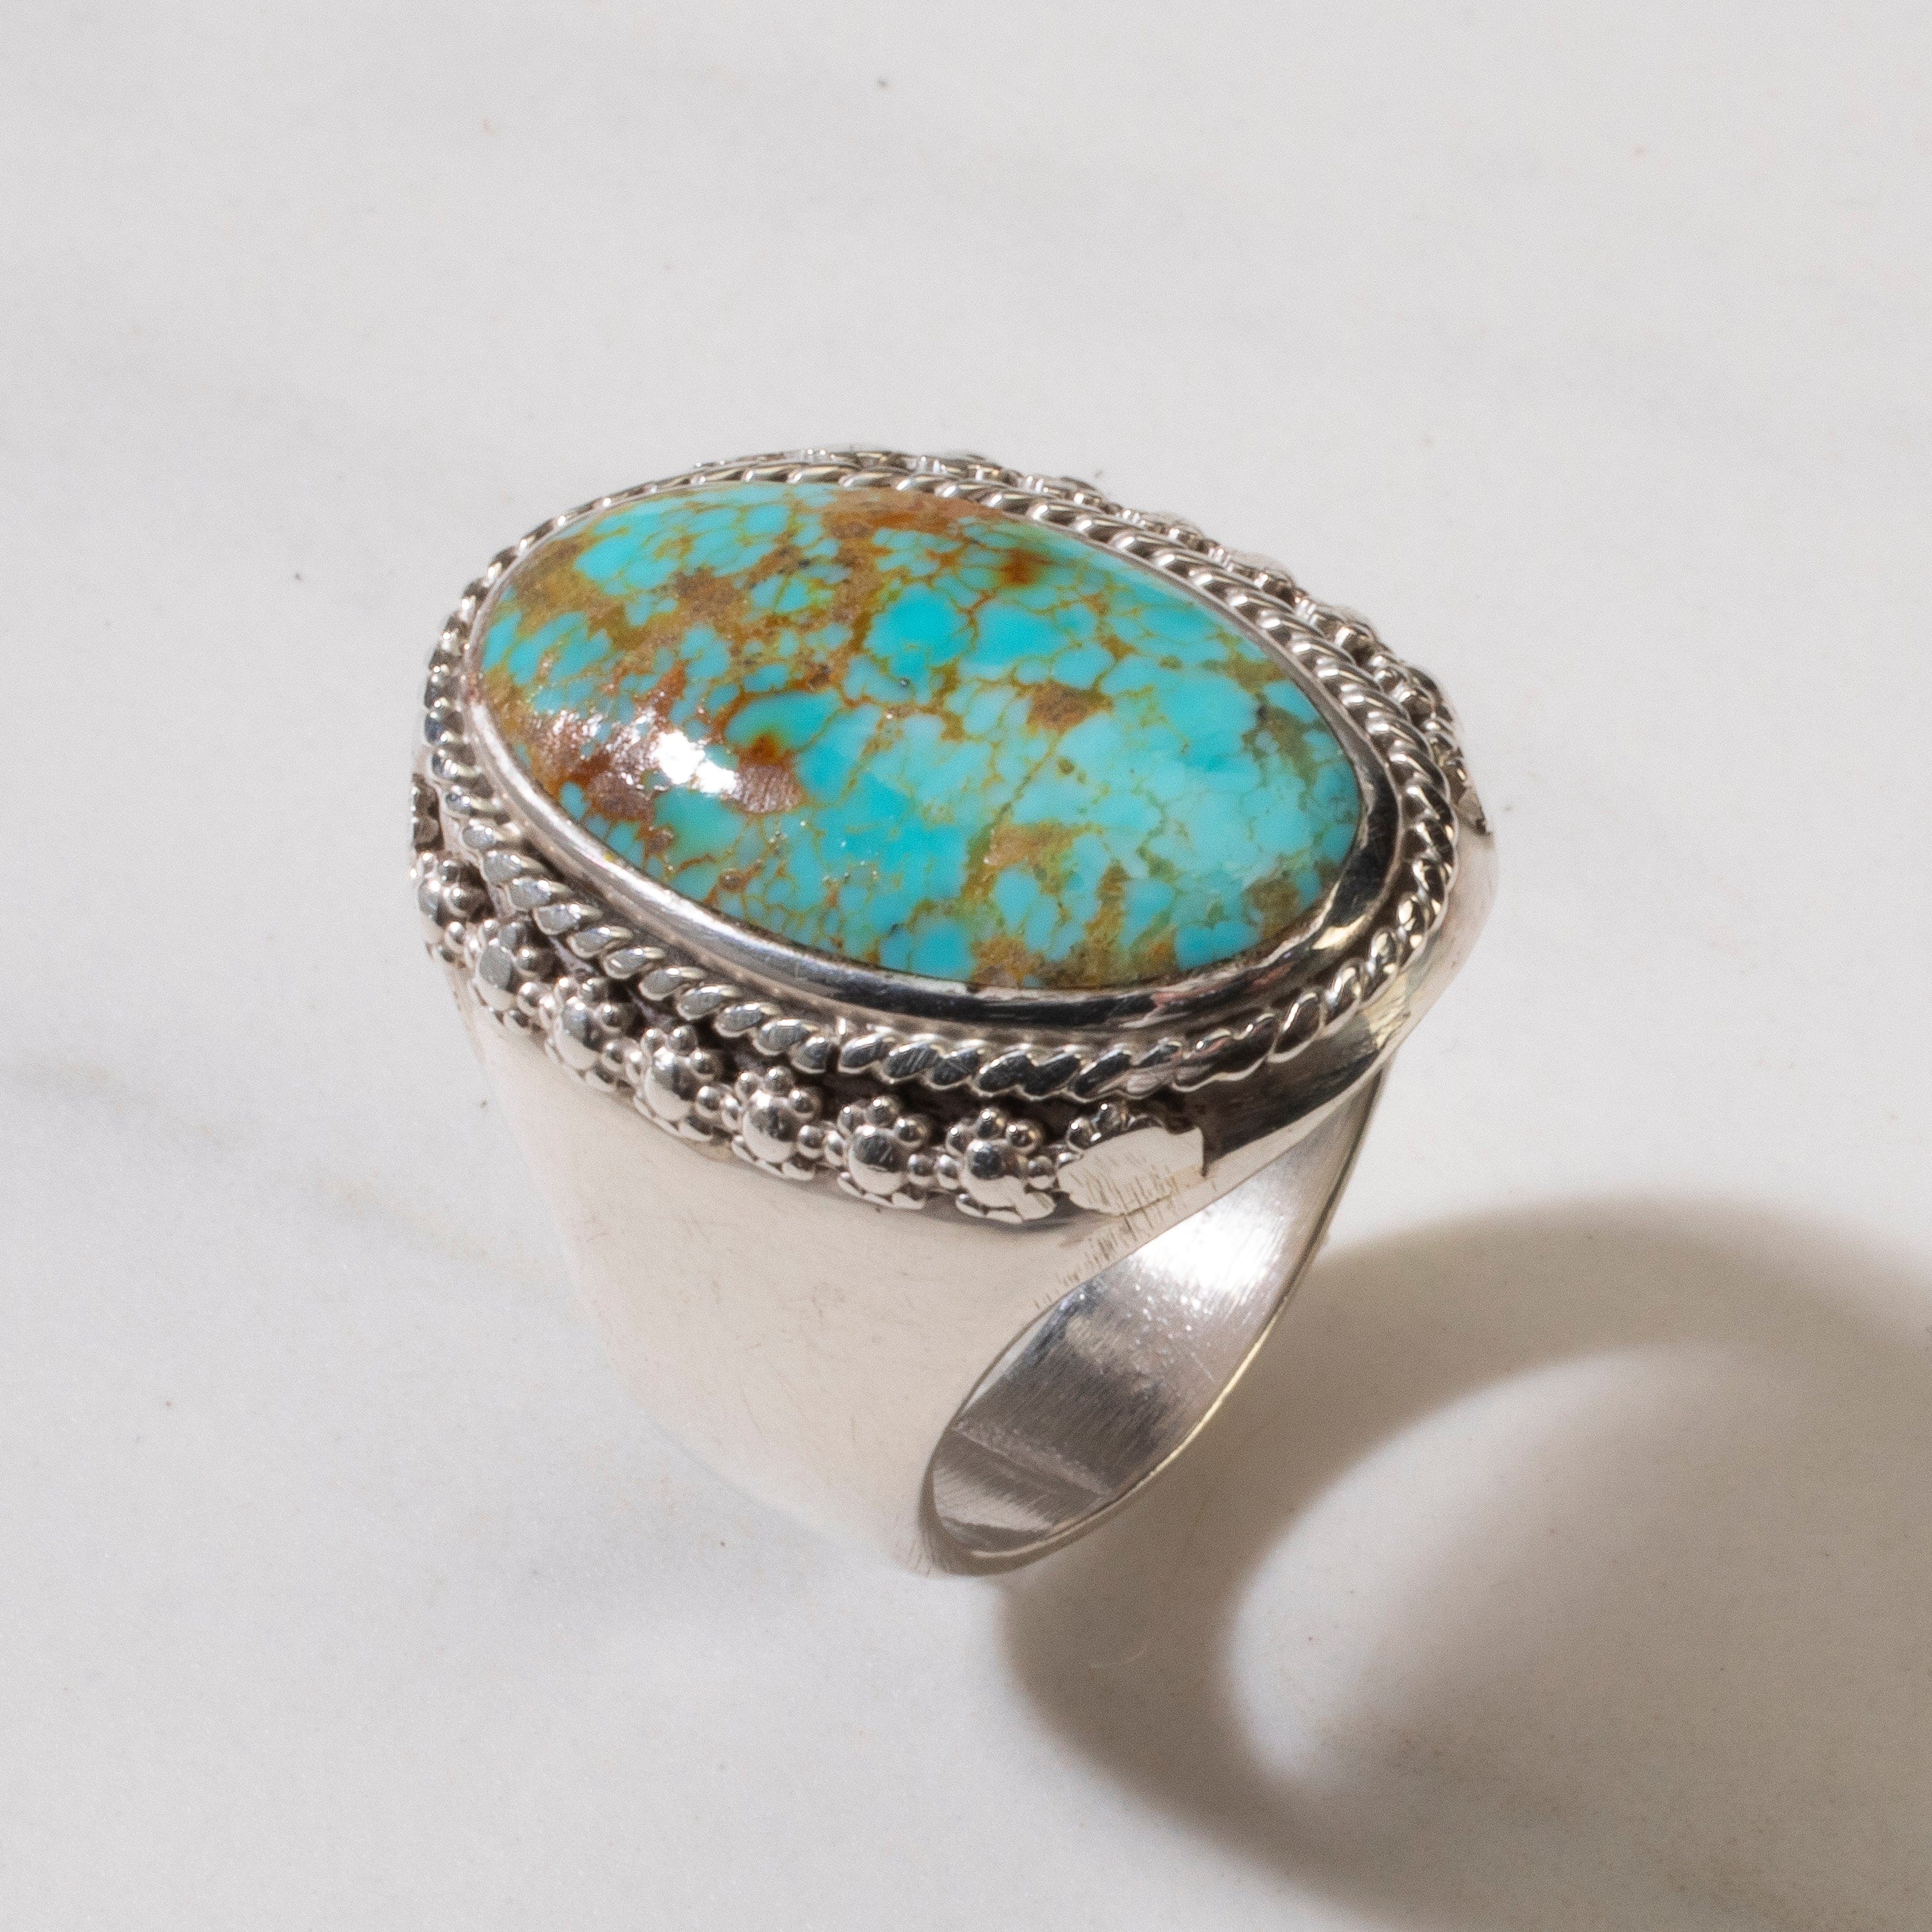 Kalifano Native American Jewelry 11 King Manassa Turquoise Navajo USA Native American Made 925 Sterling Silver Ring NAR700.046.11